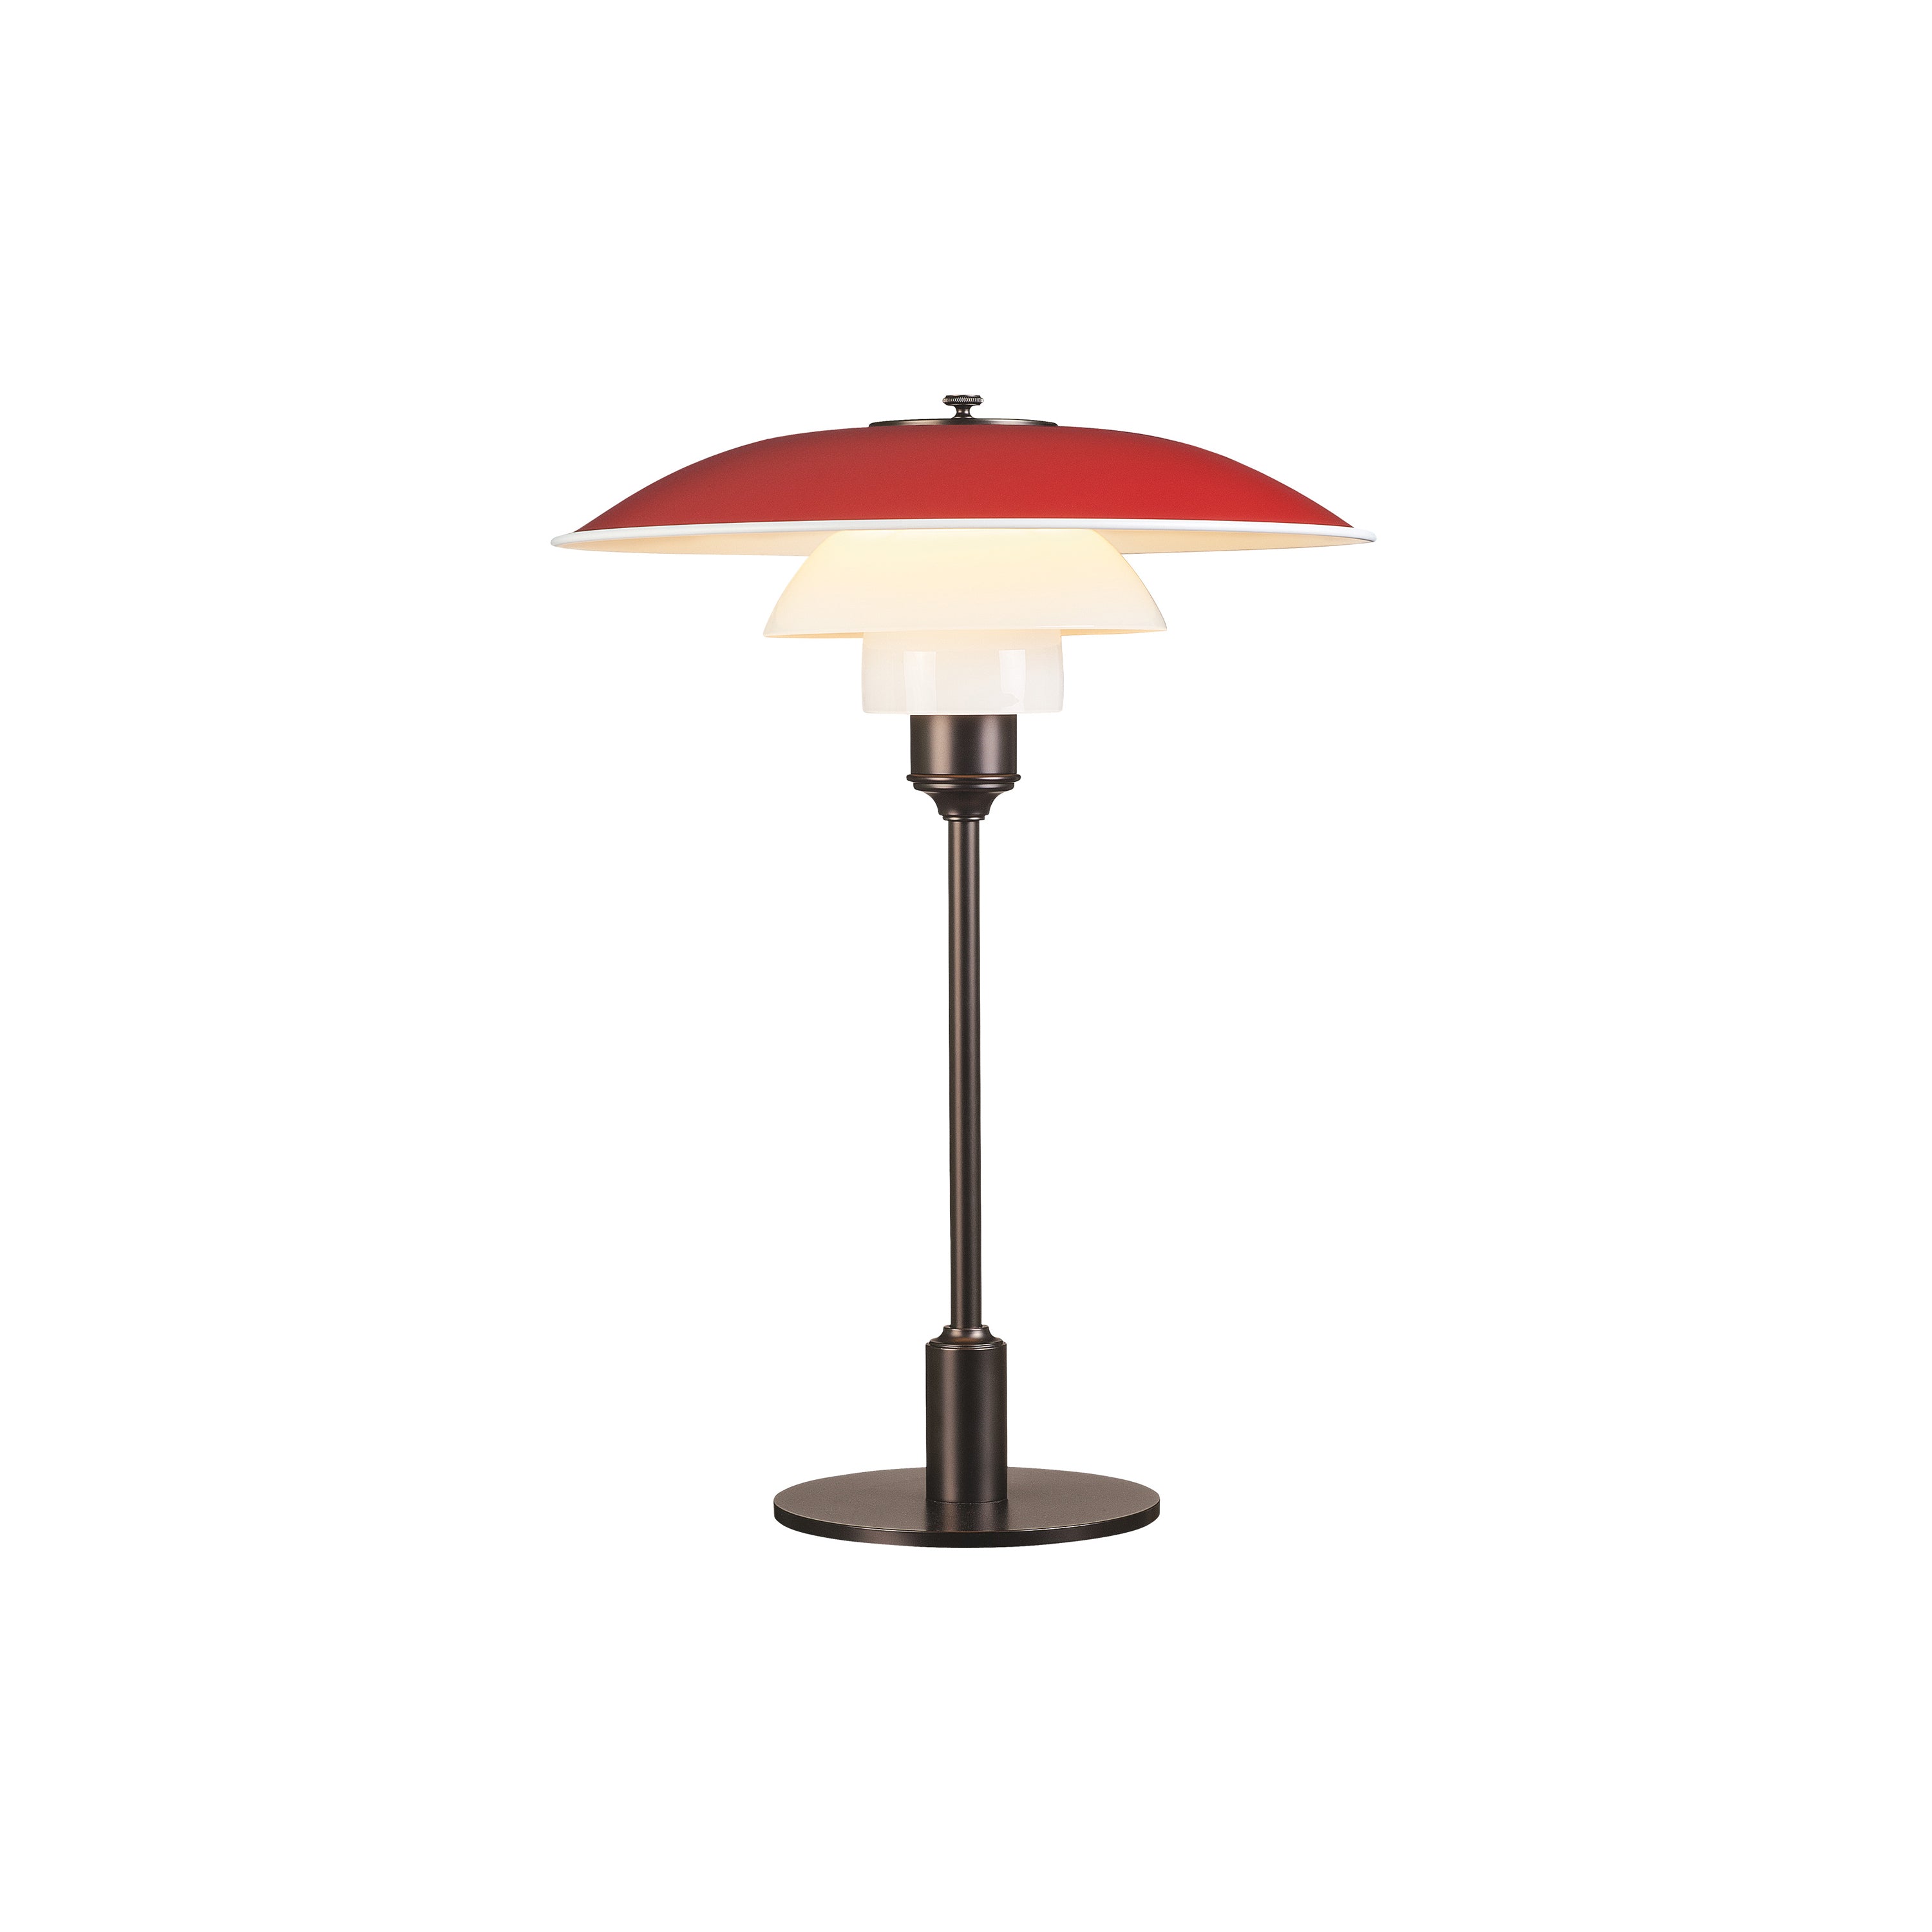 PH 3½-2½ Table Lamp: Red